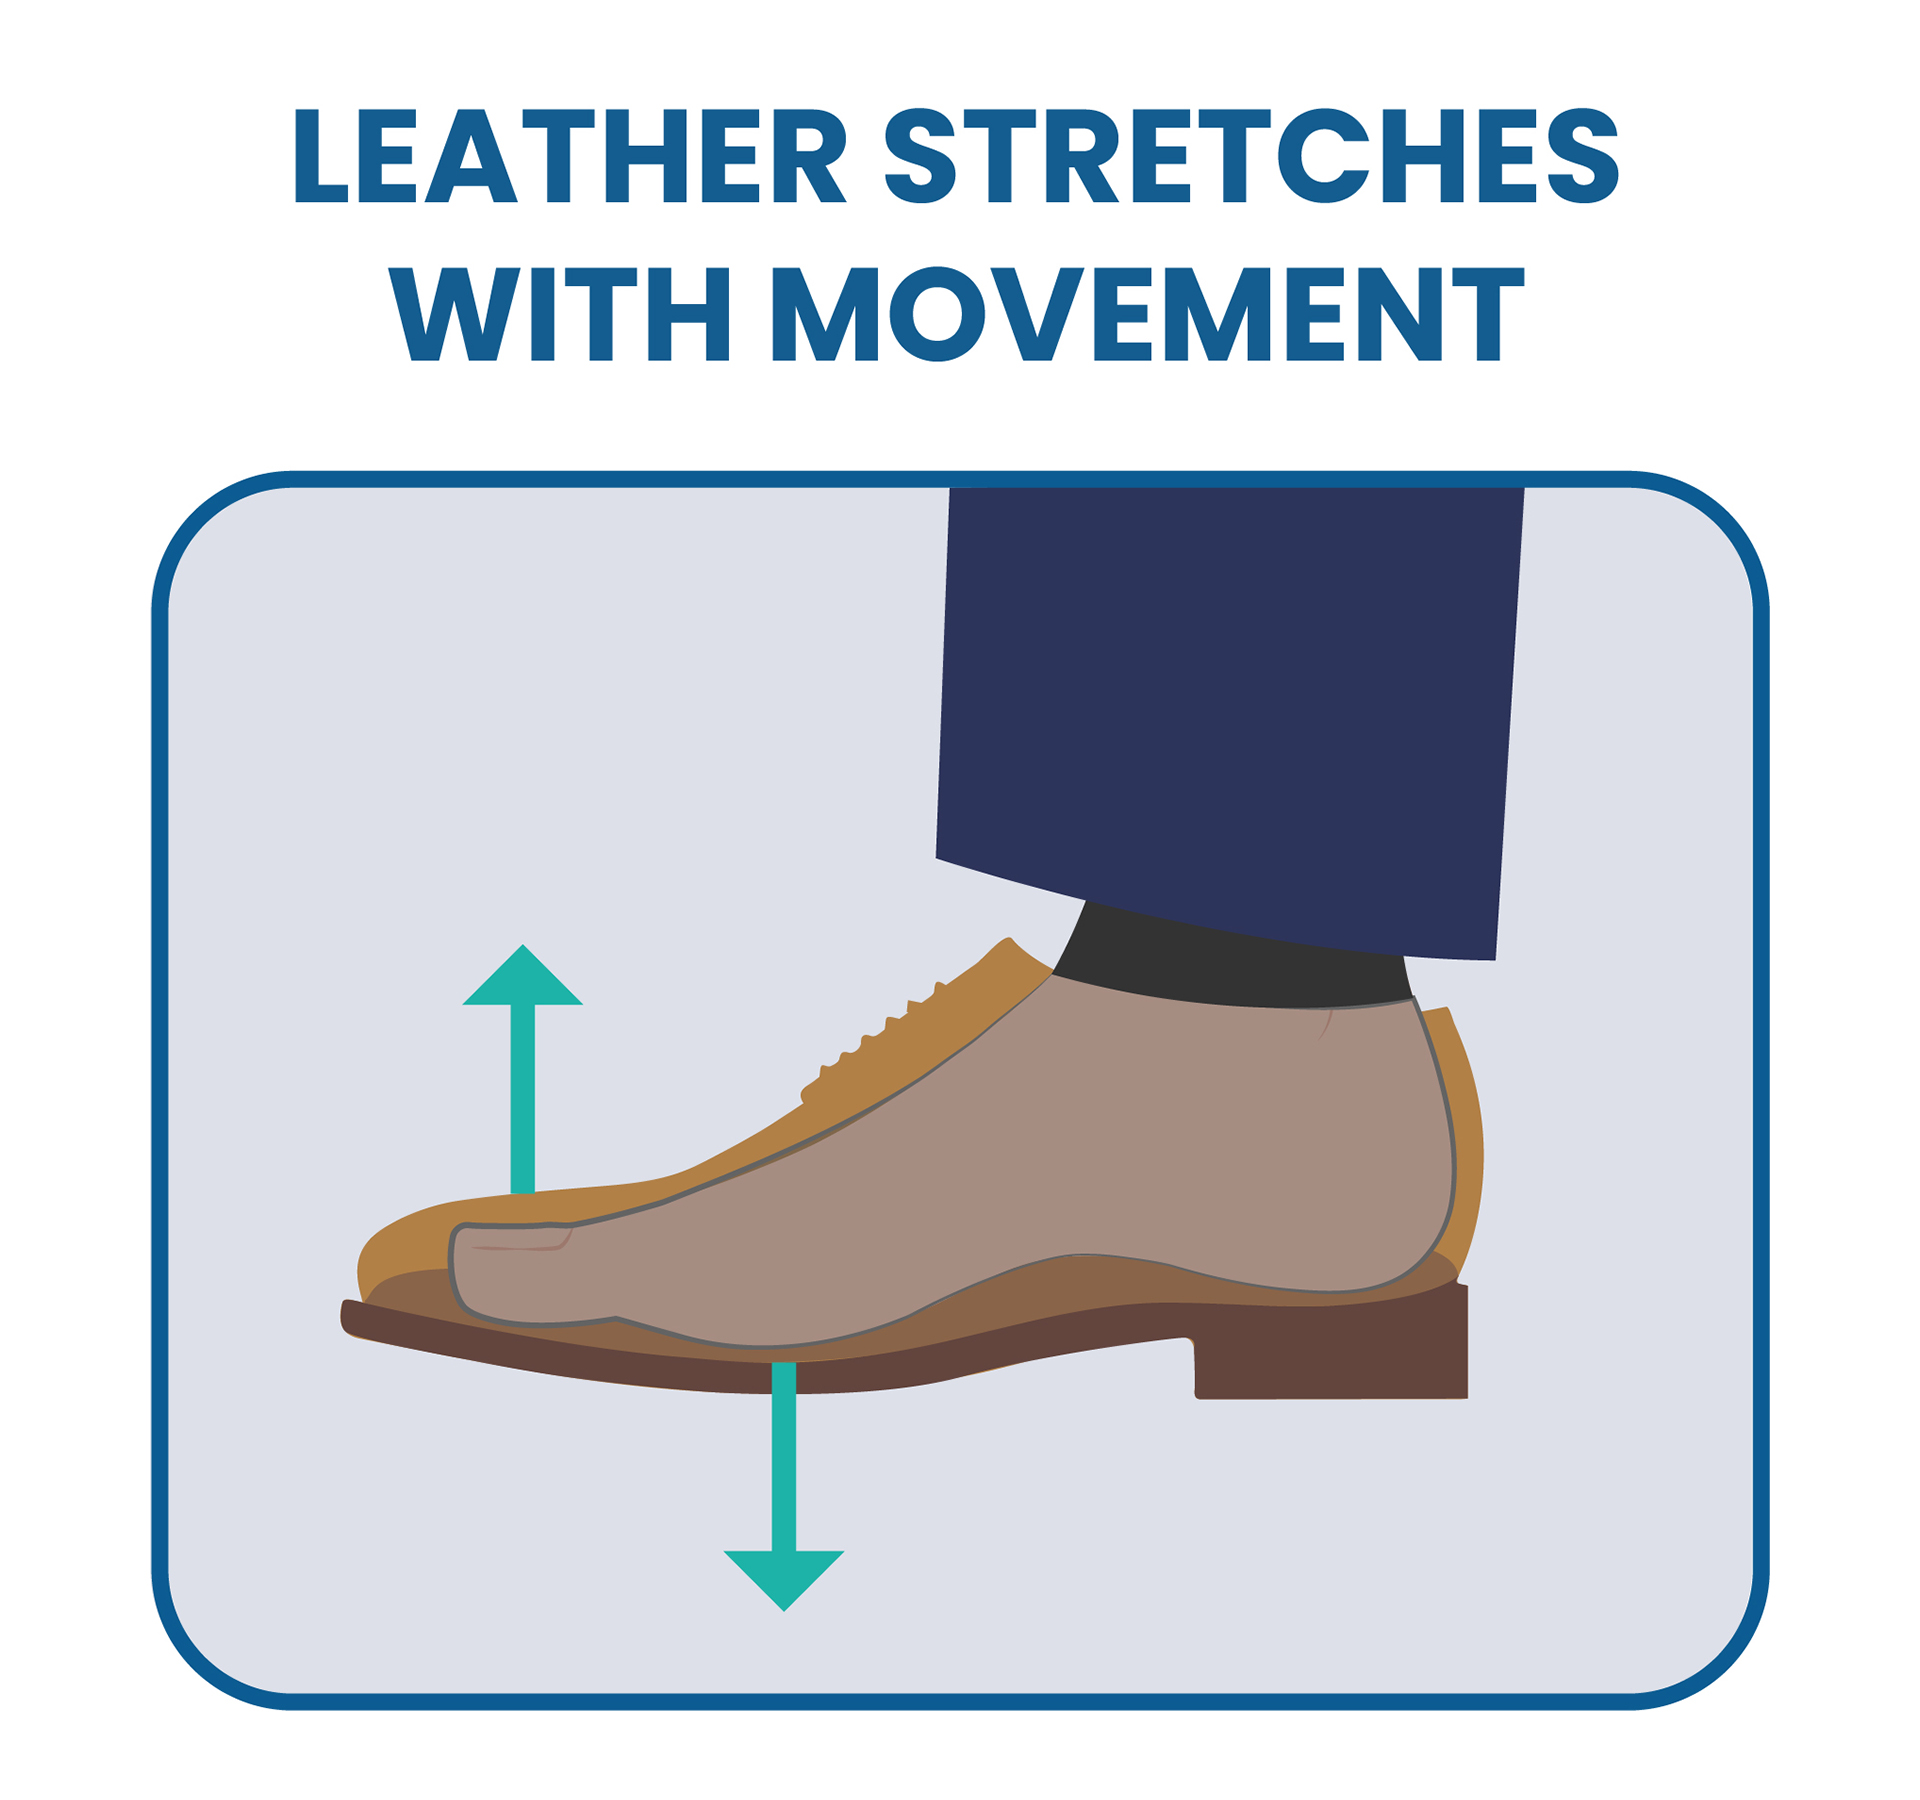 high-quality leather will soften and stretch with repeated movements